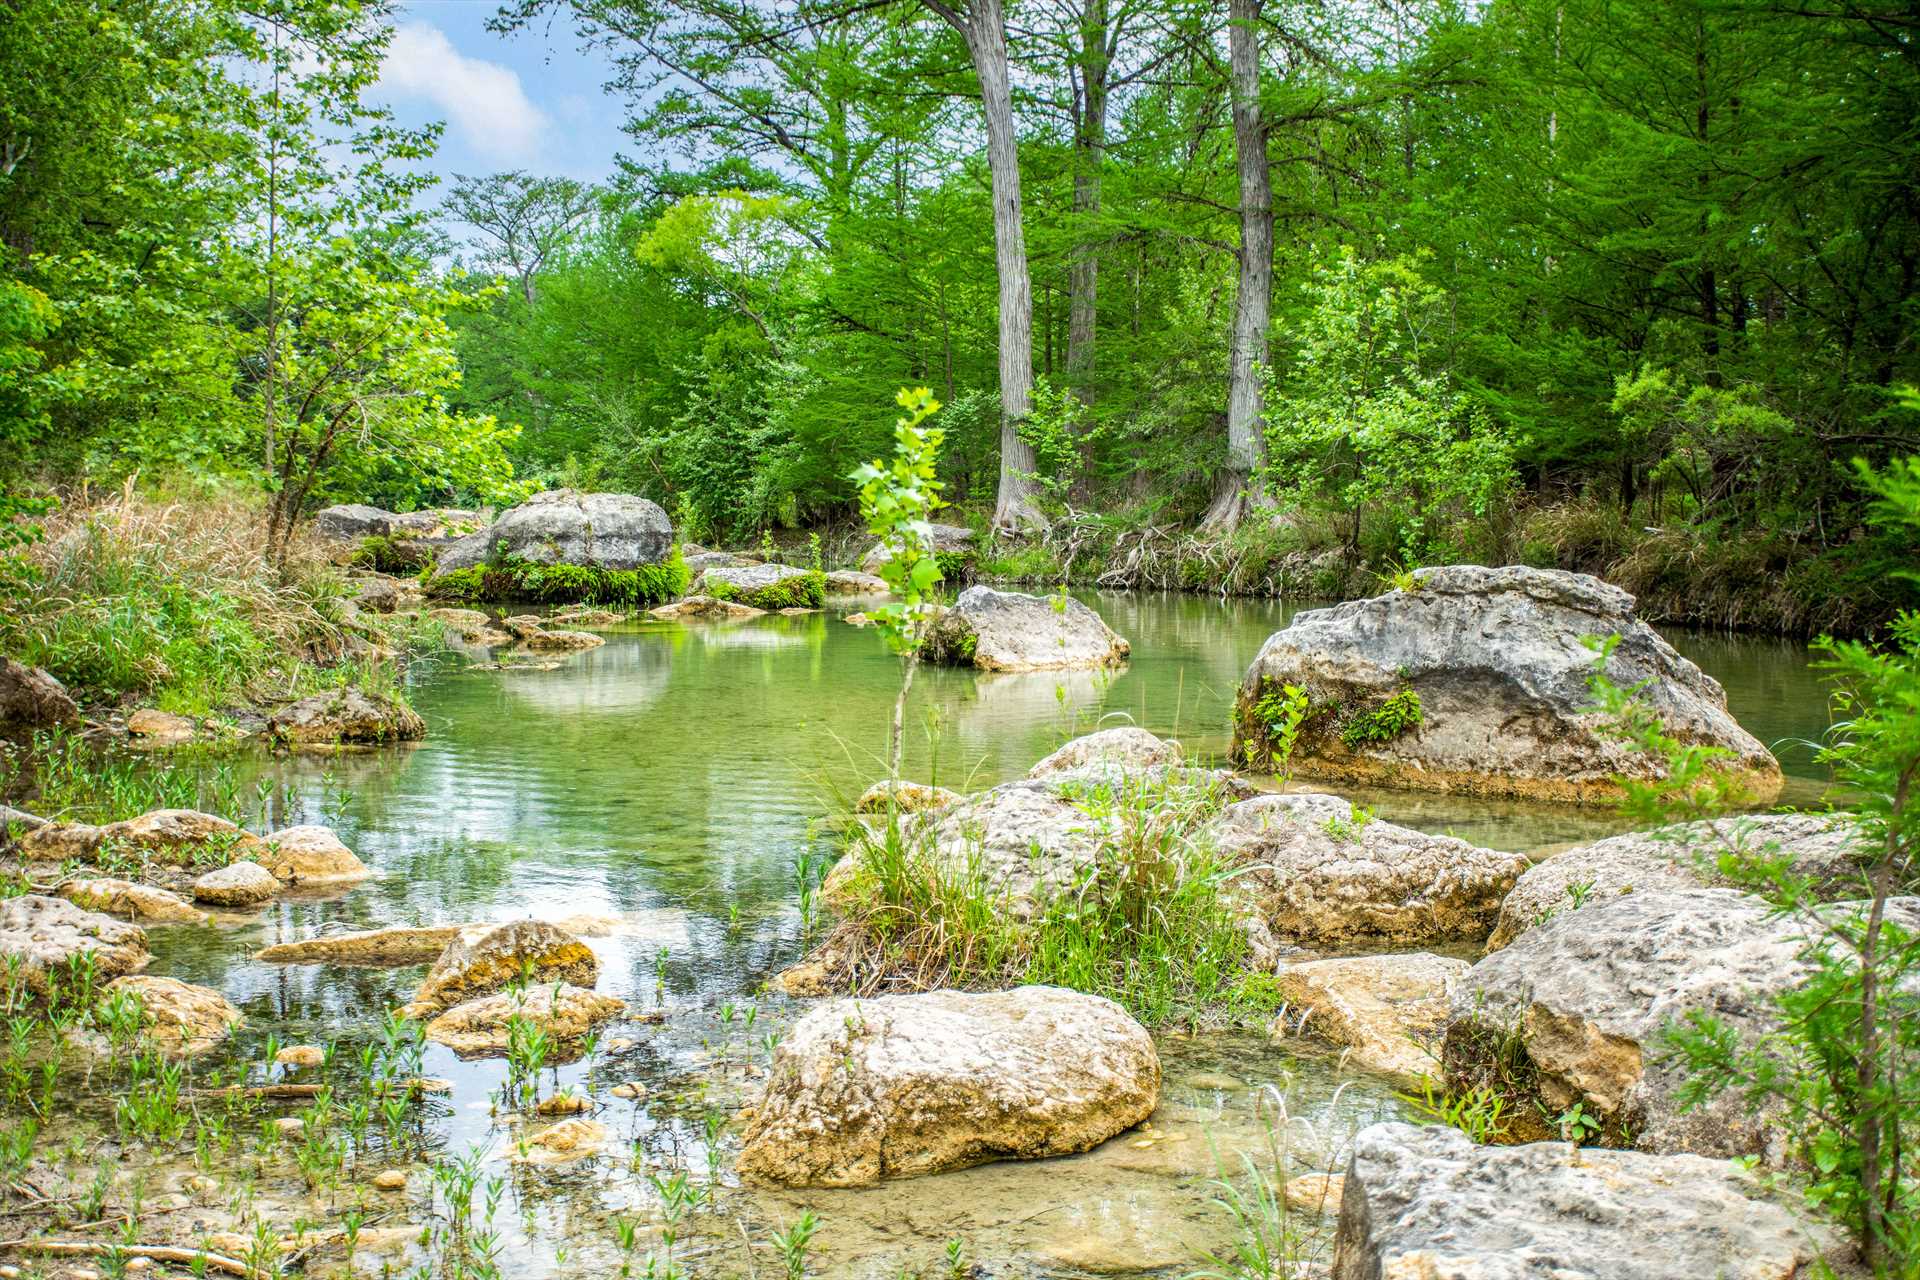                                                 Cool off and enjoy the serene and relaxing beauty of the Hill Country in this riverside paradise!